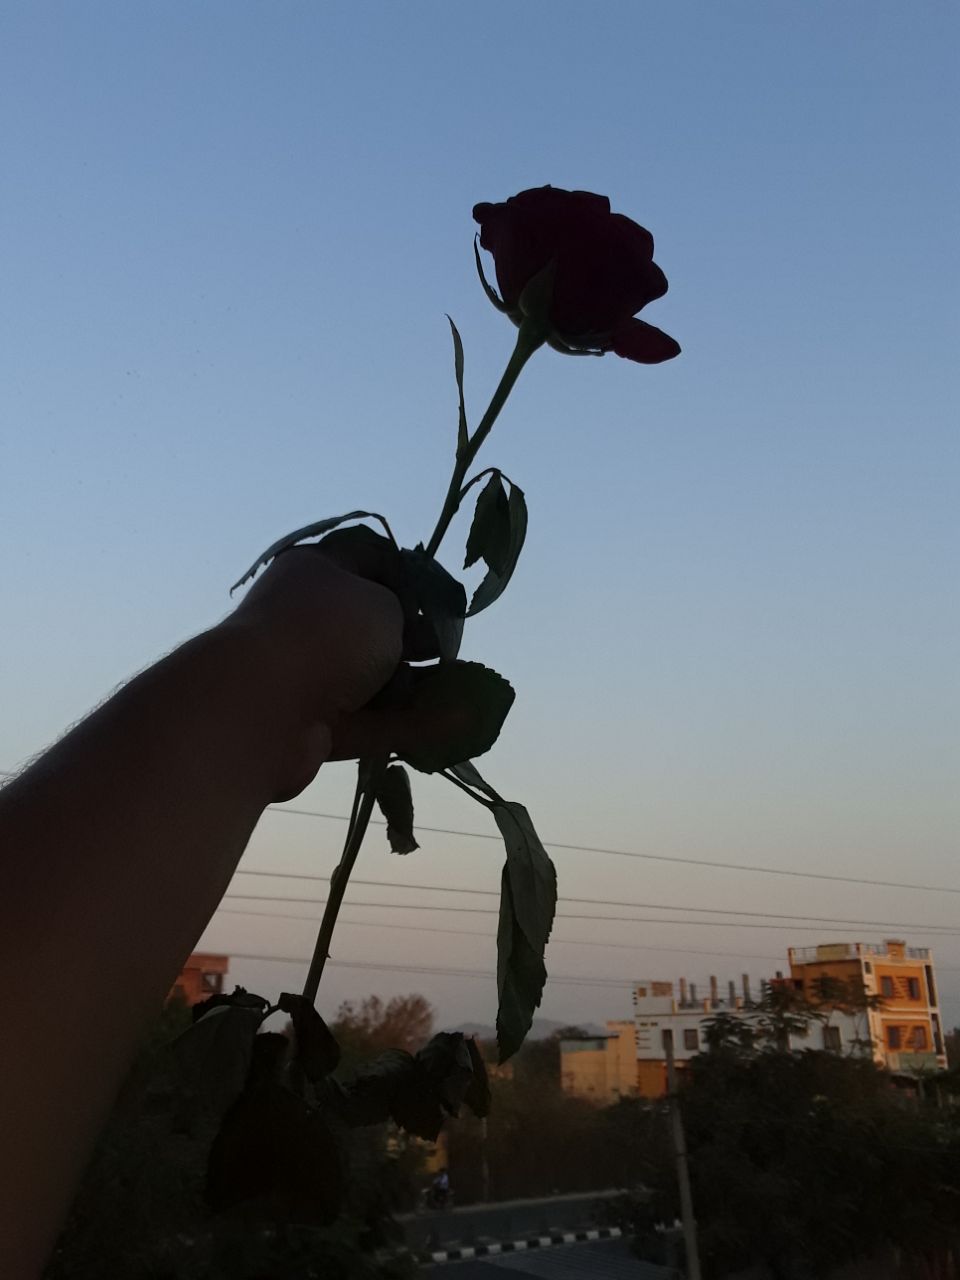 a hand holding a rose